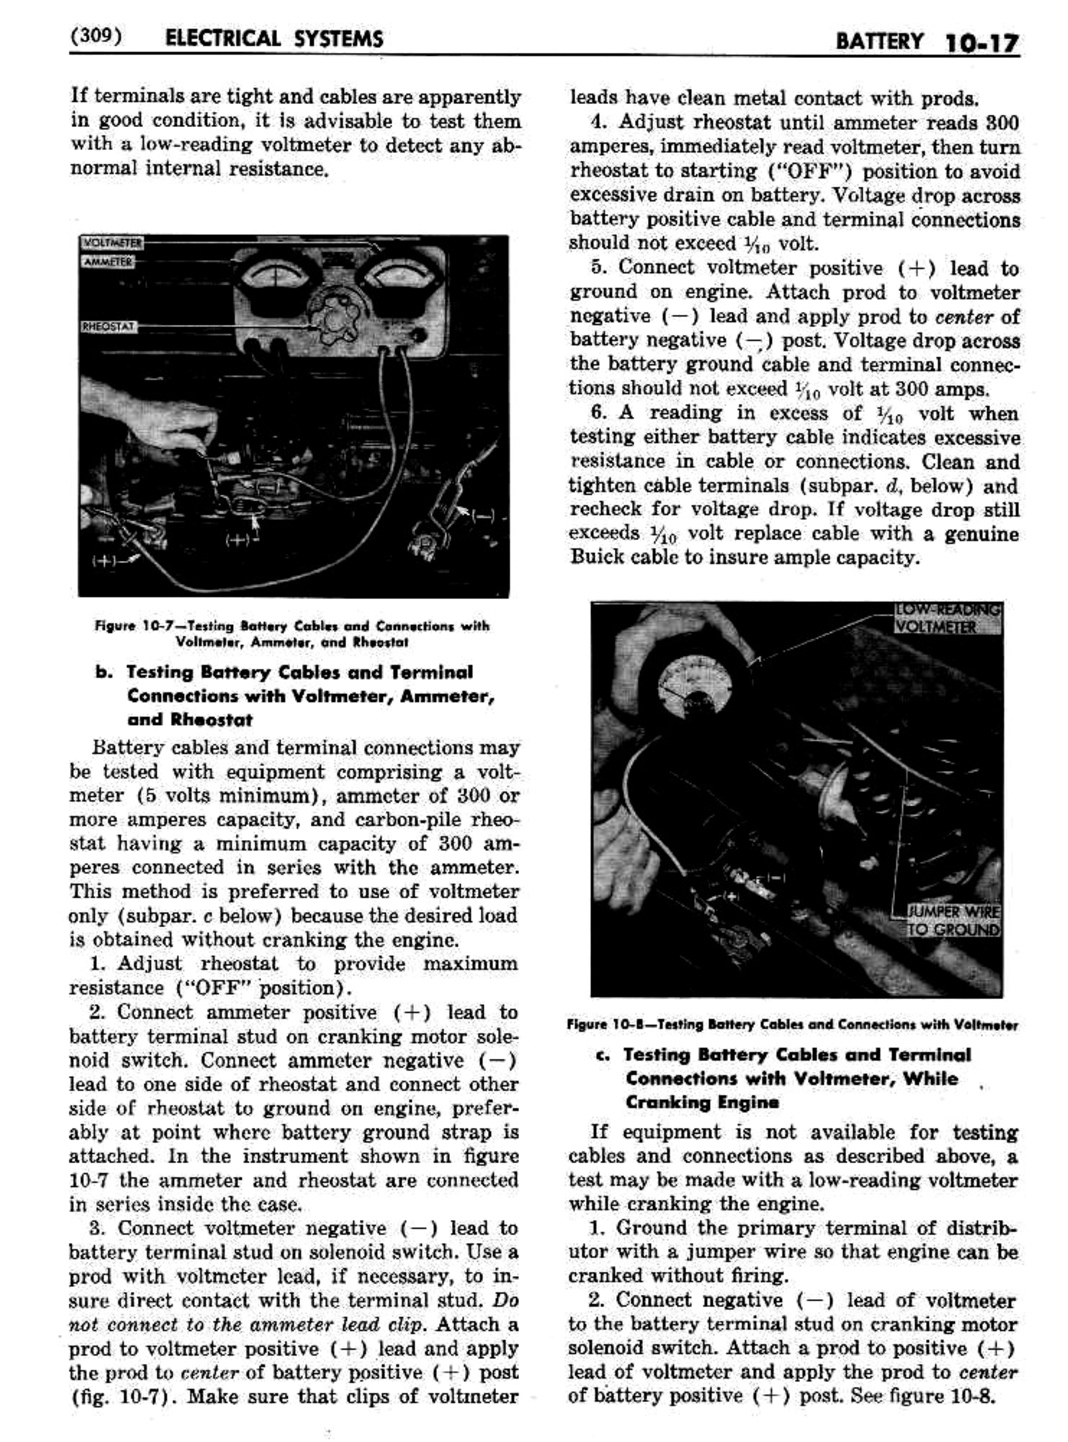 n_11 1951 Buick Shop Manual - Electrical Systems-017-017.jpg